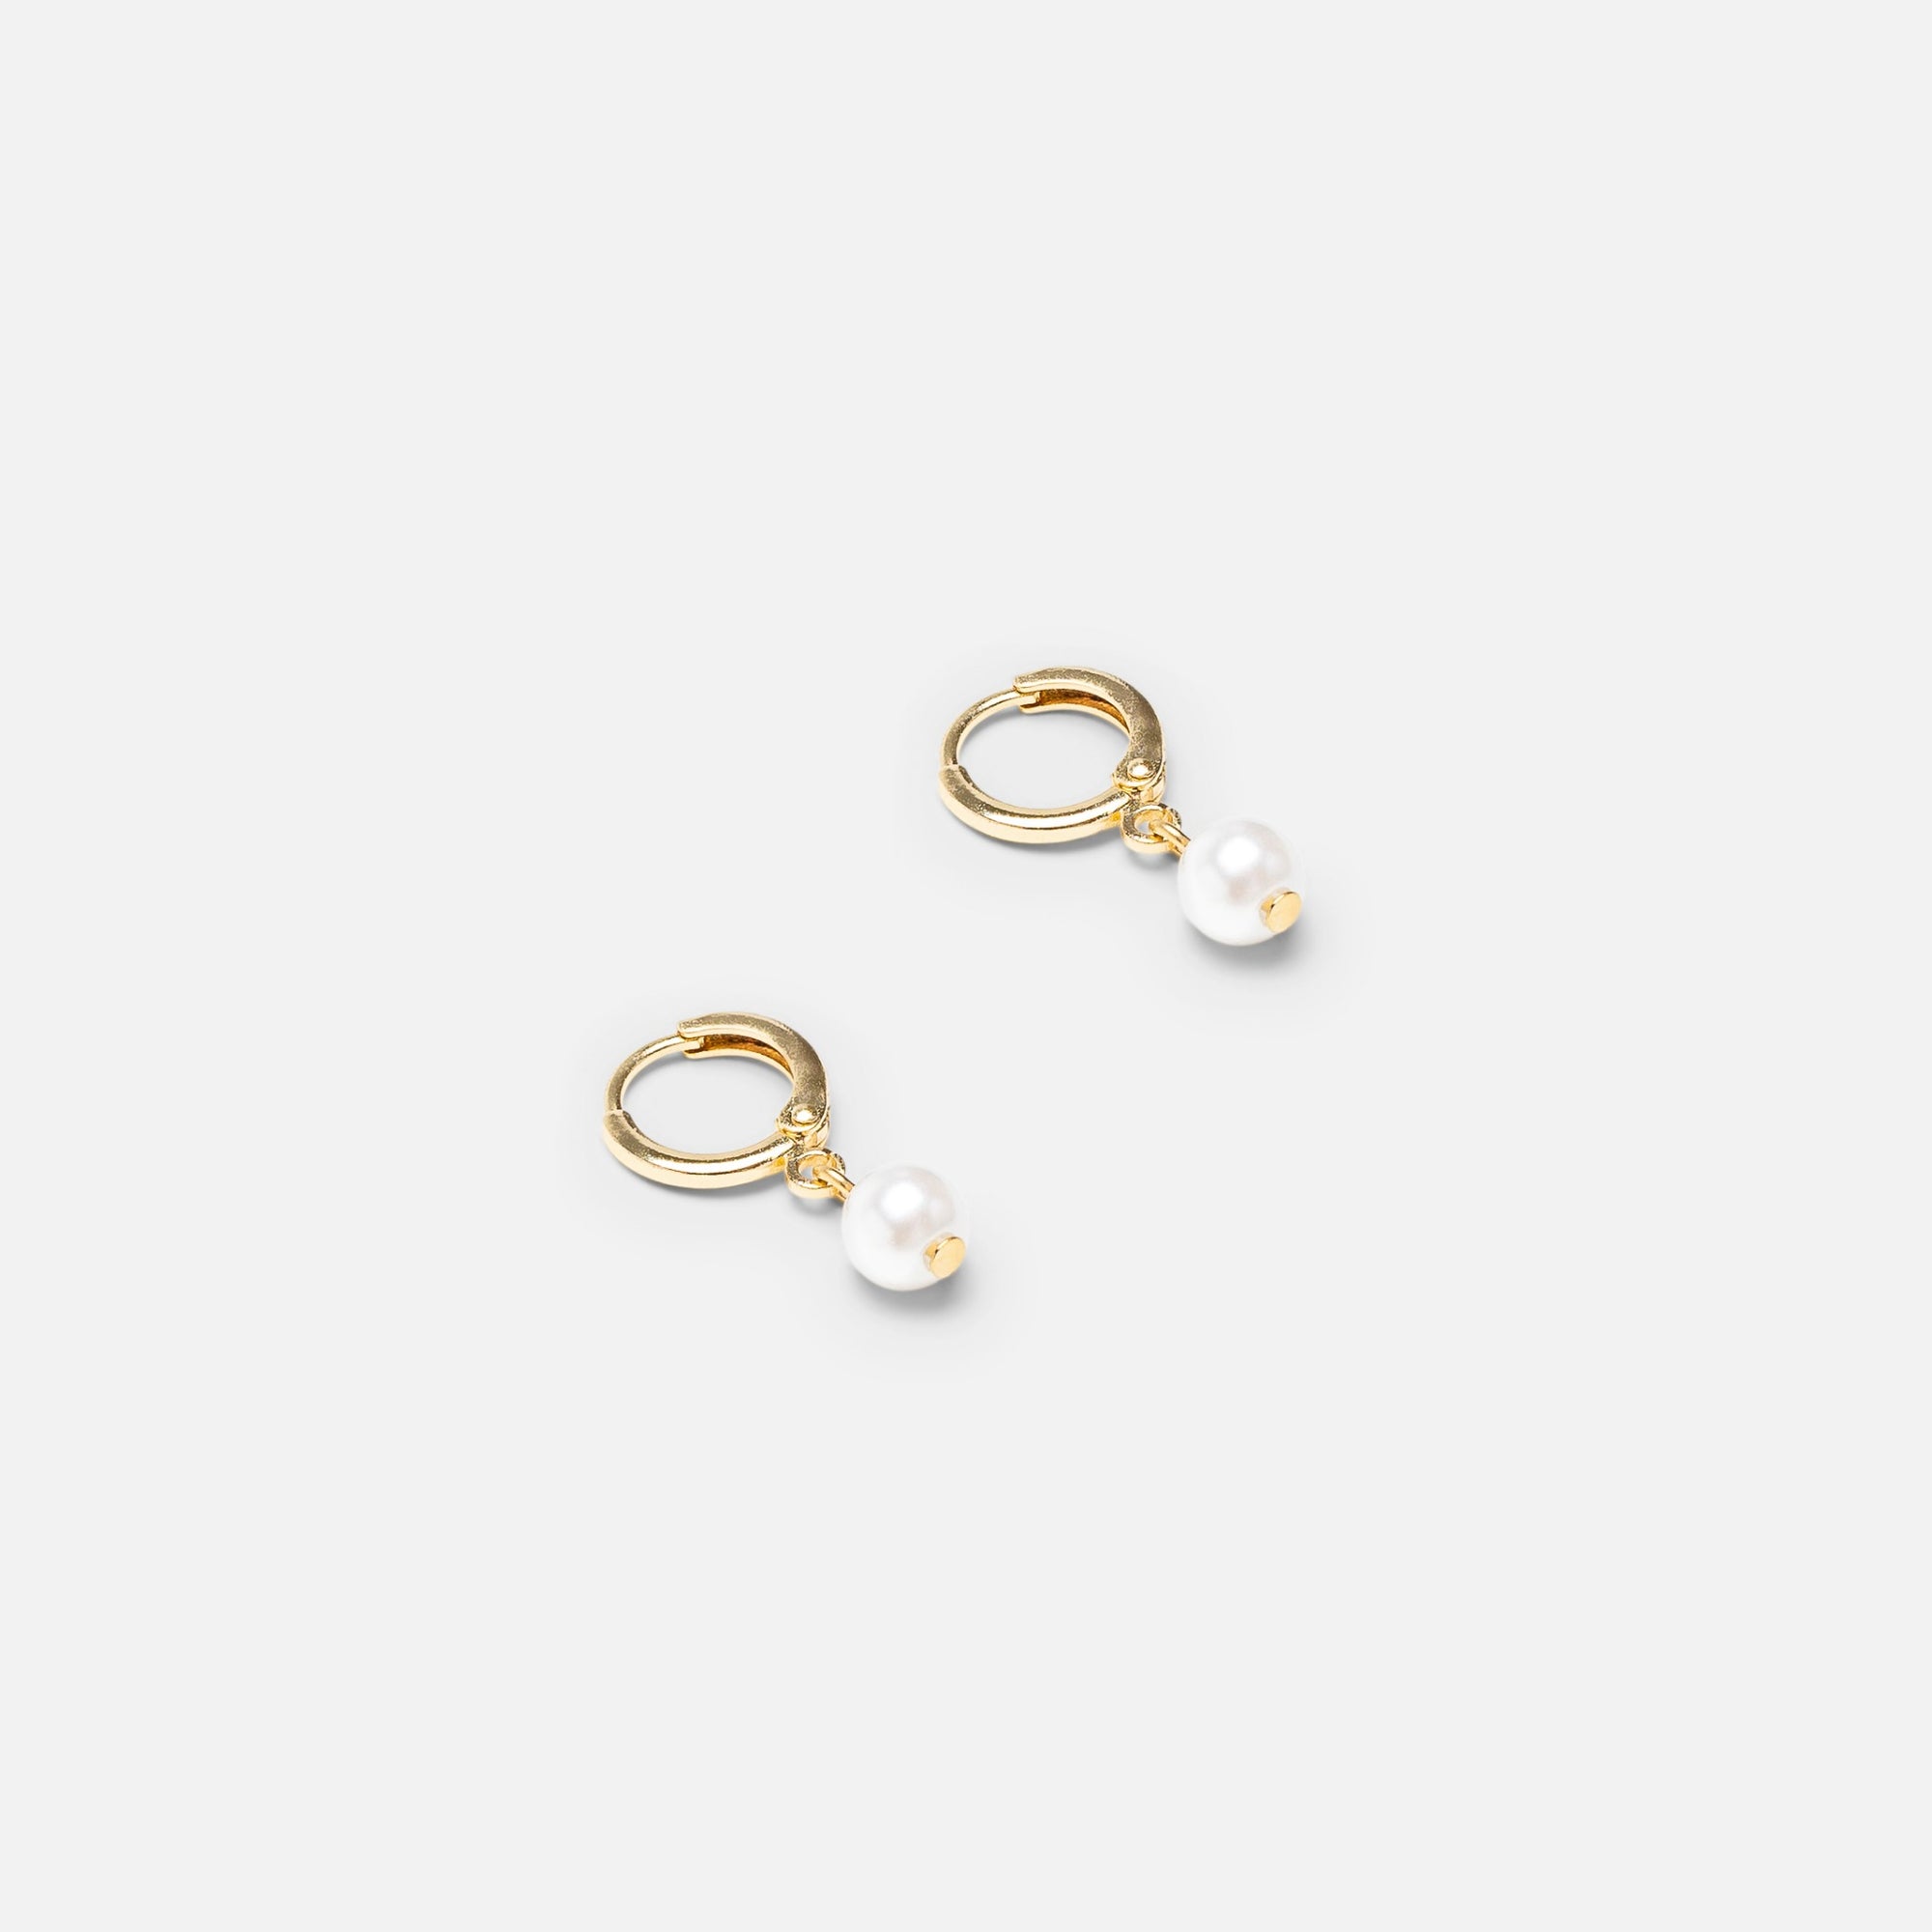 Set of pearl, circle and hoop earrings with pearl charm